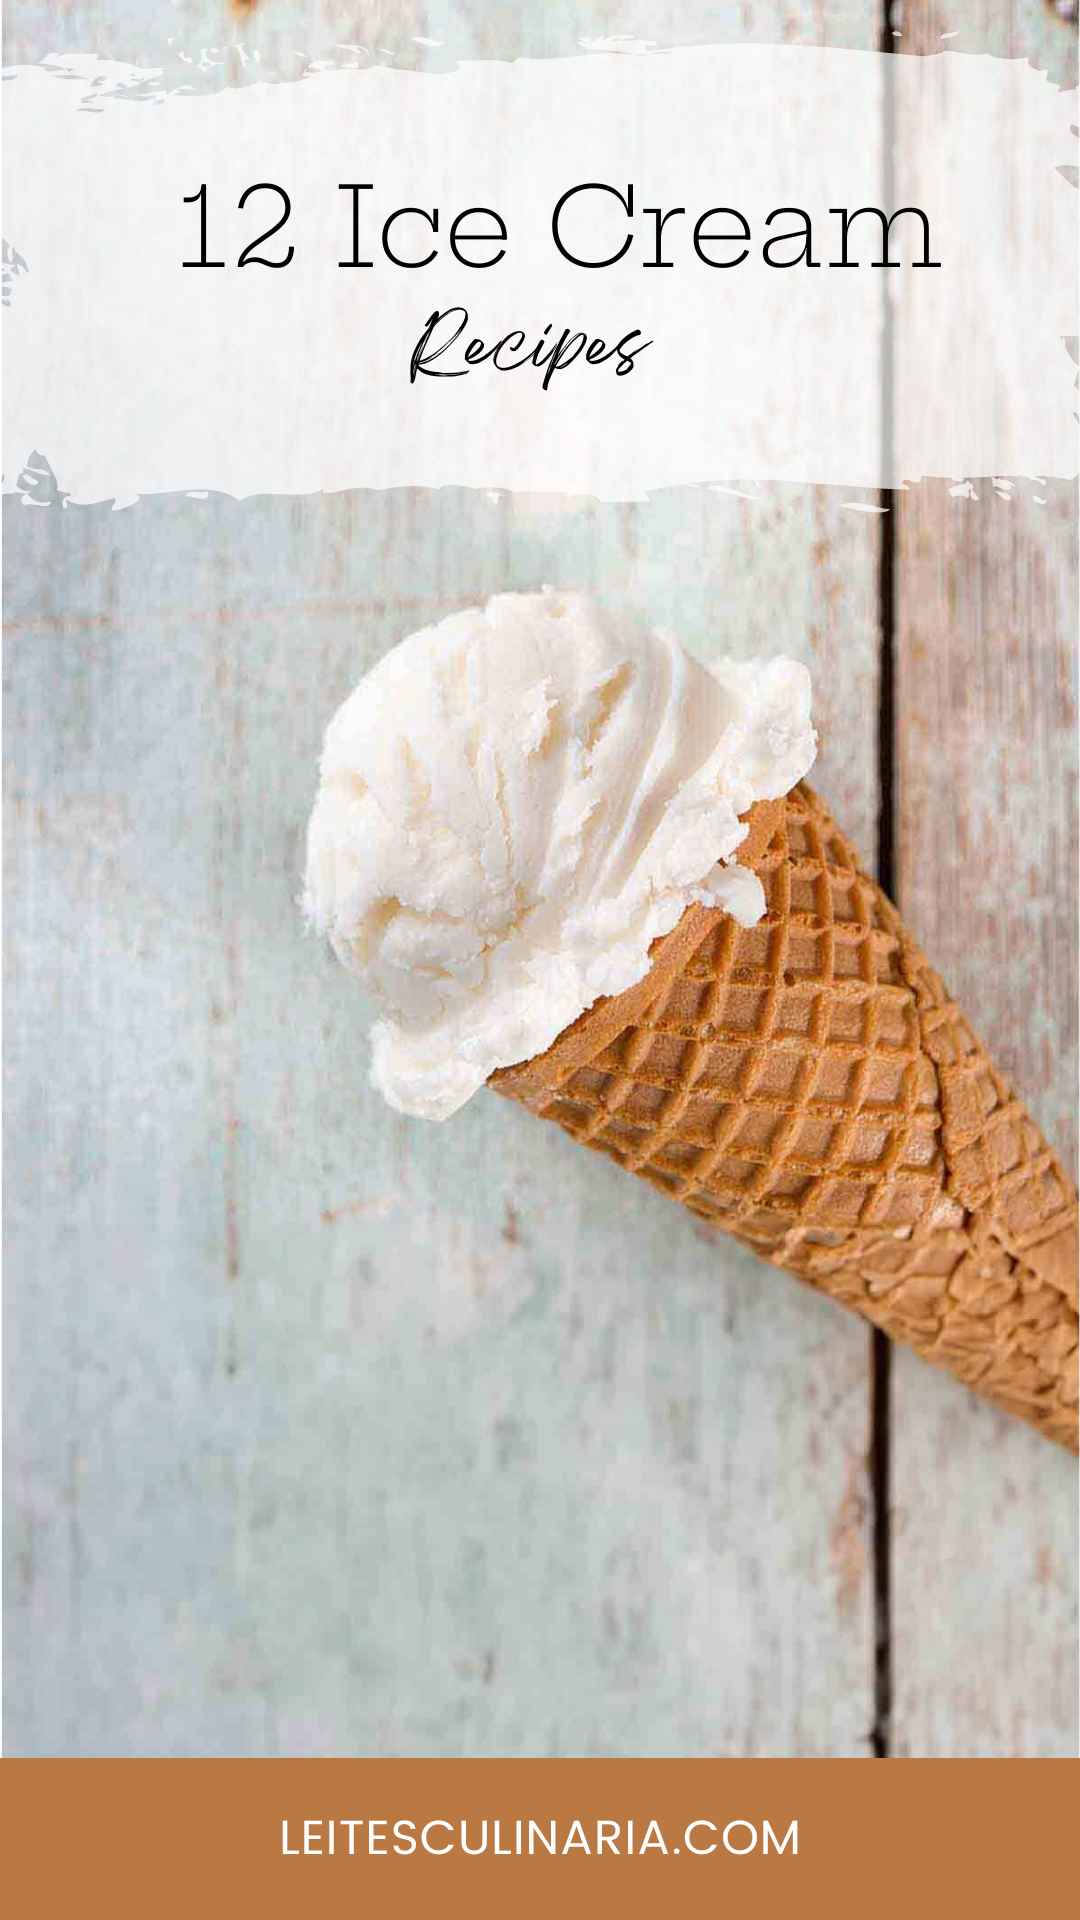 A scoop of coconut ice cream in a waffle cone.